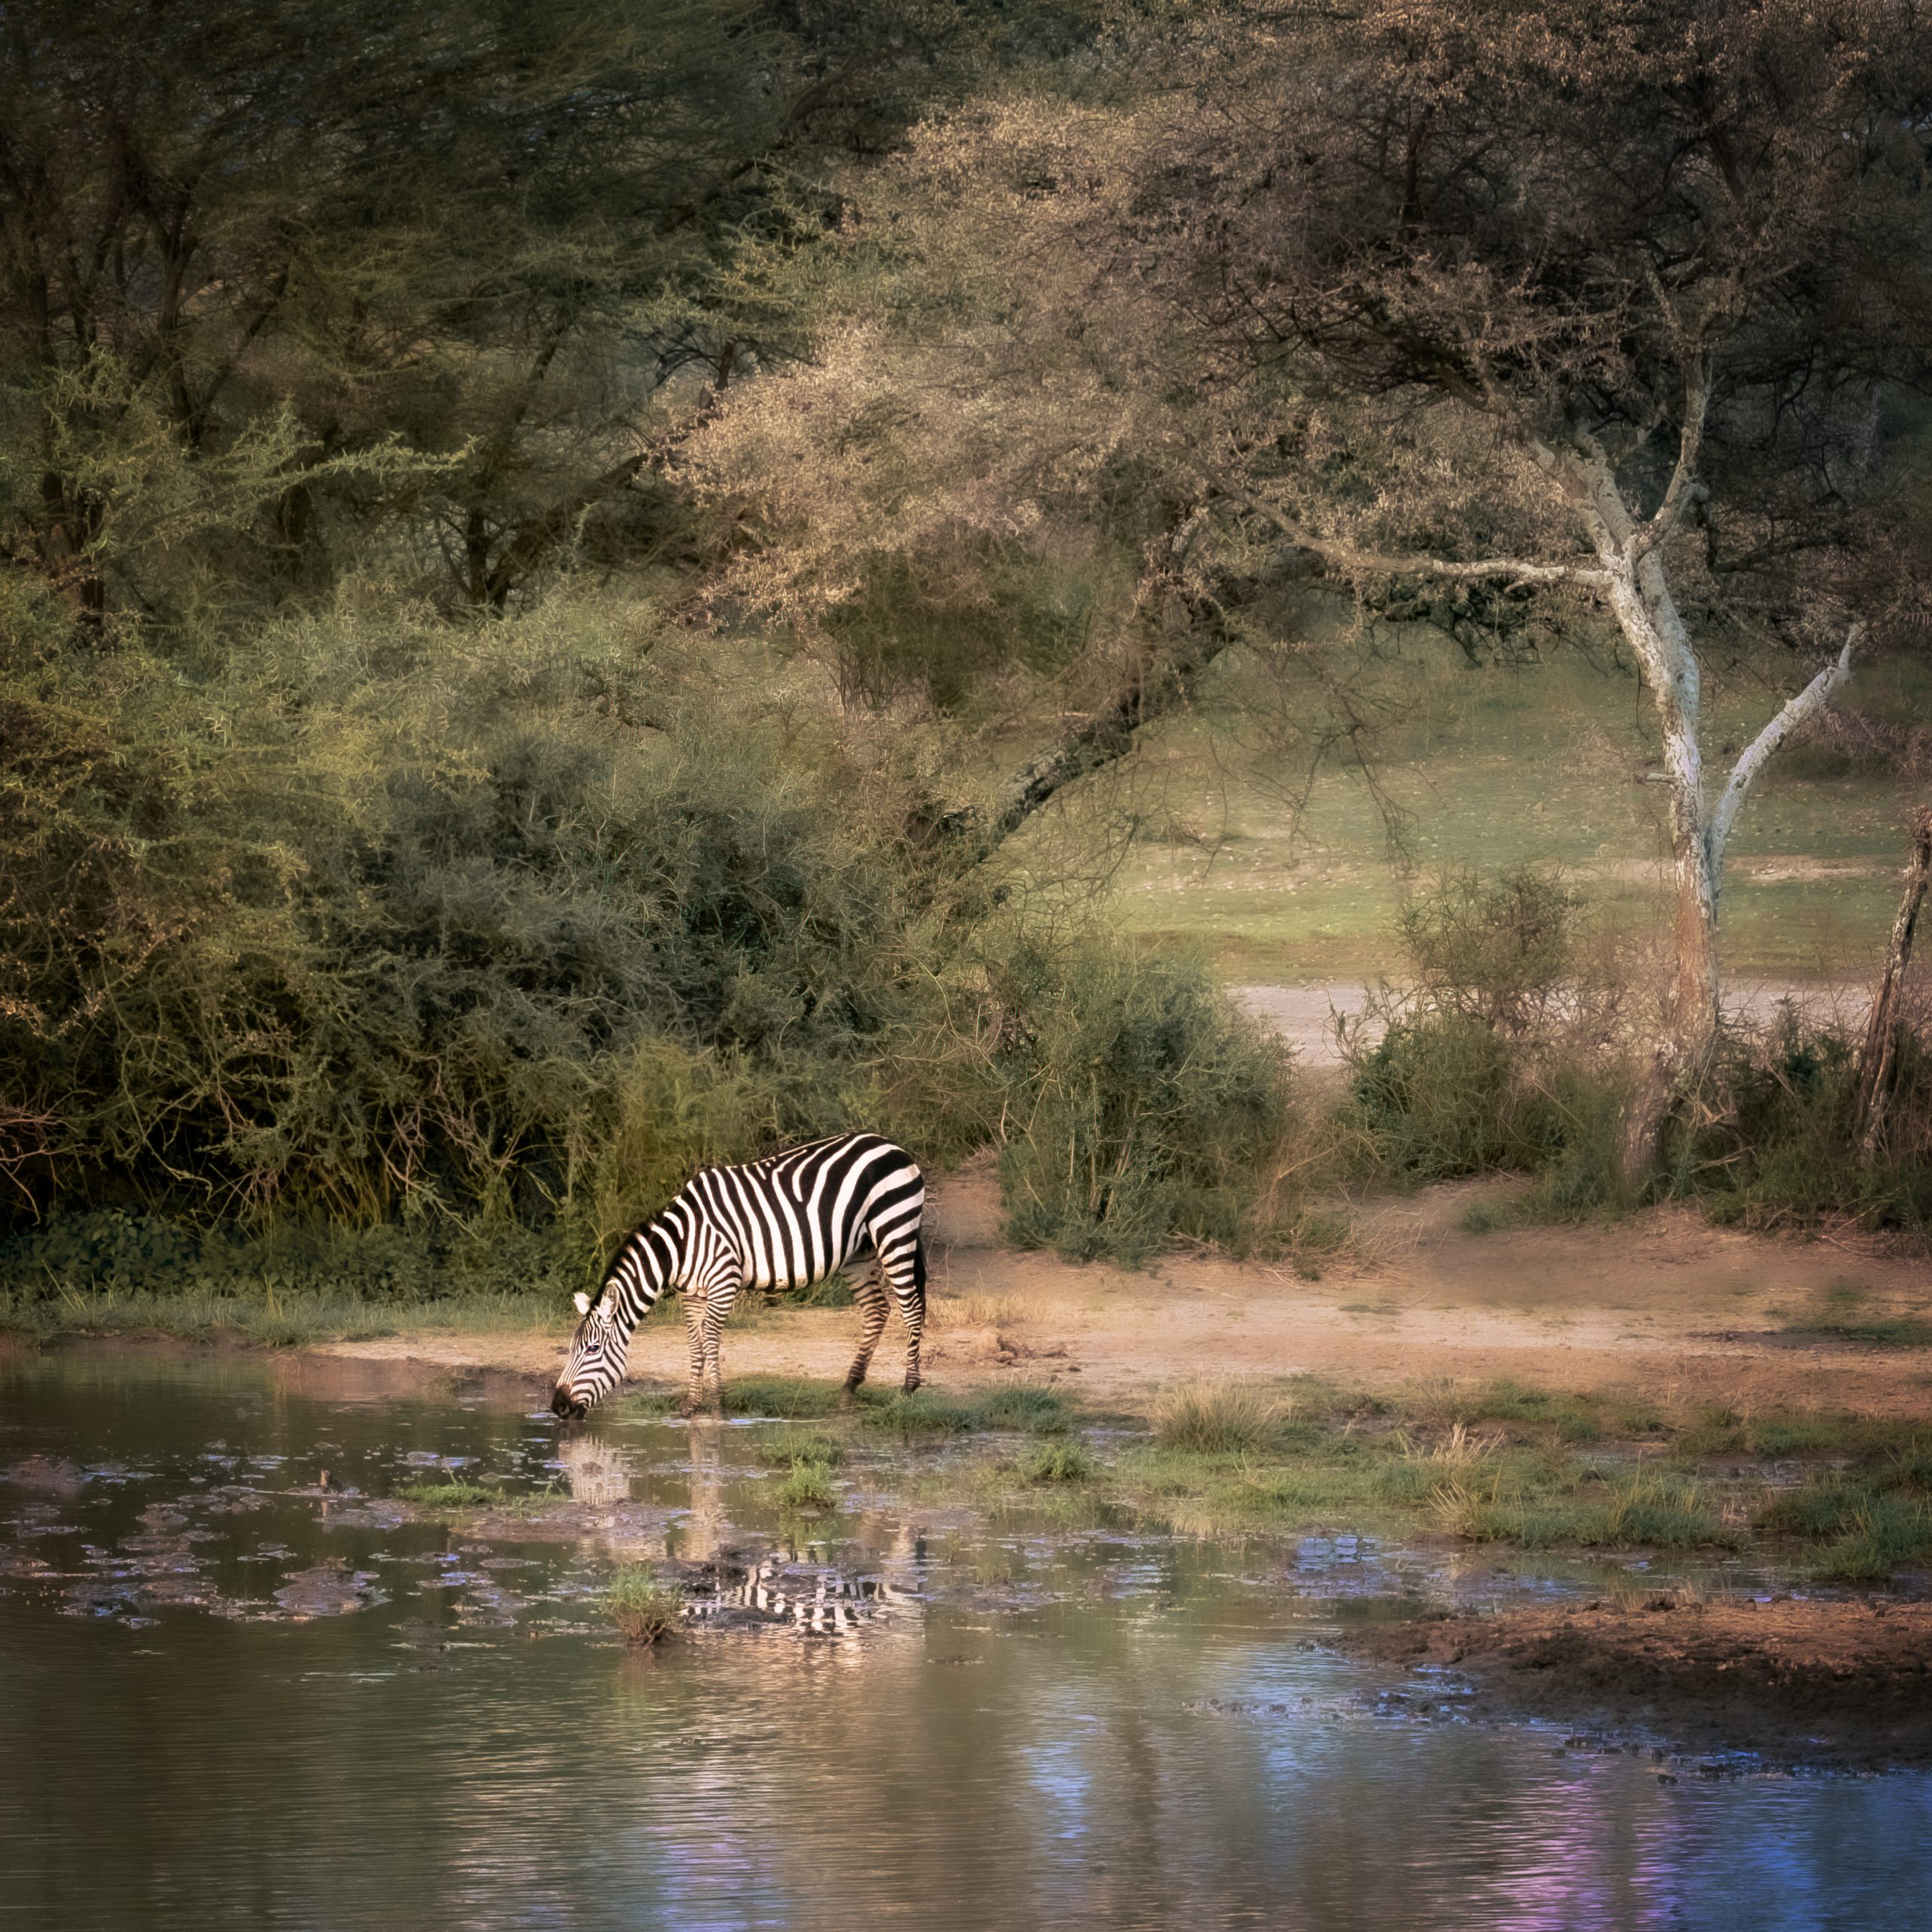 Zebras drinking water from river